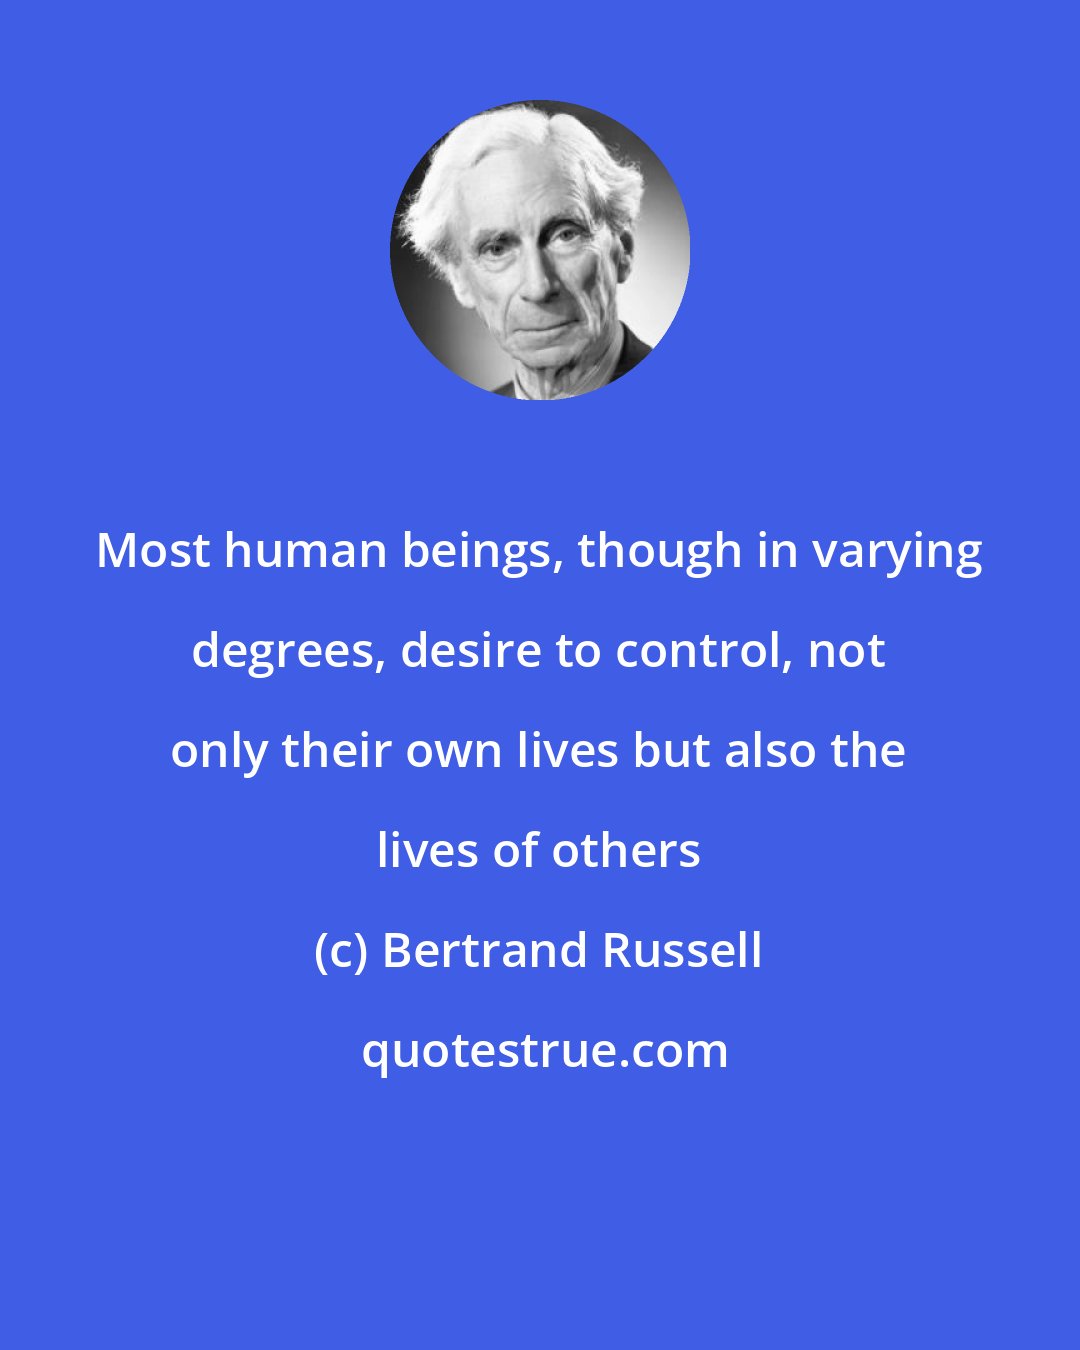 Bertrand Russell: Most human beings, though in varying degrees, desire to control, not only their own lives but also the lives of others